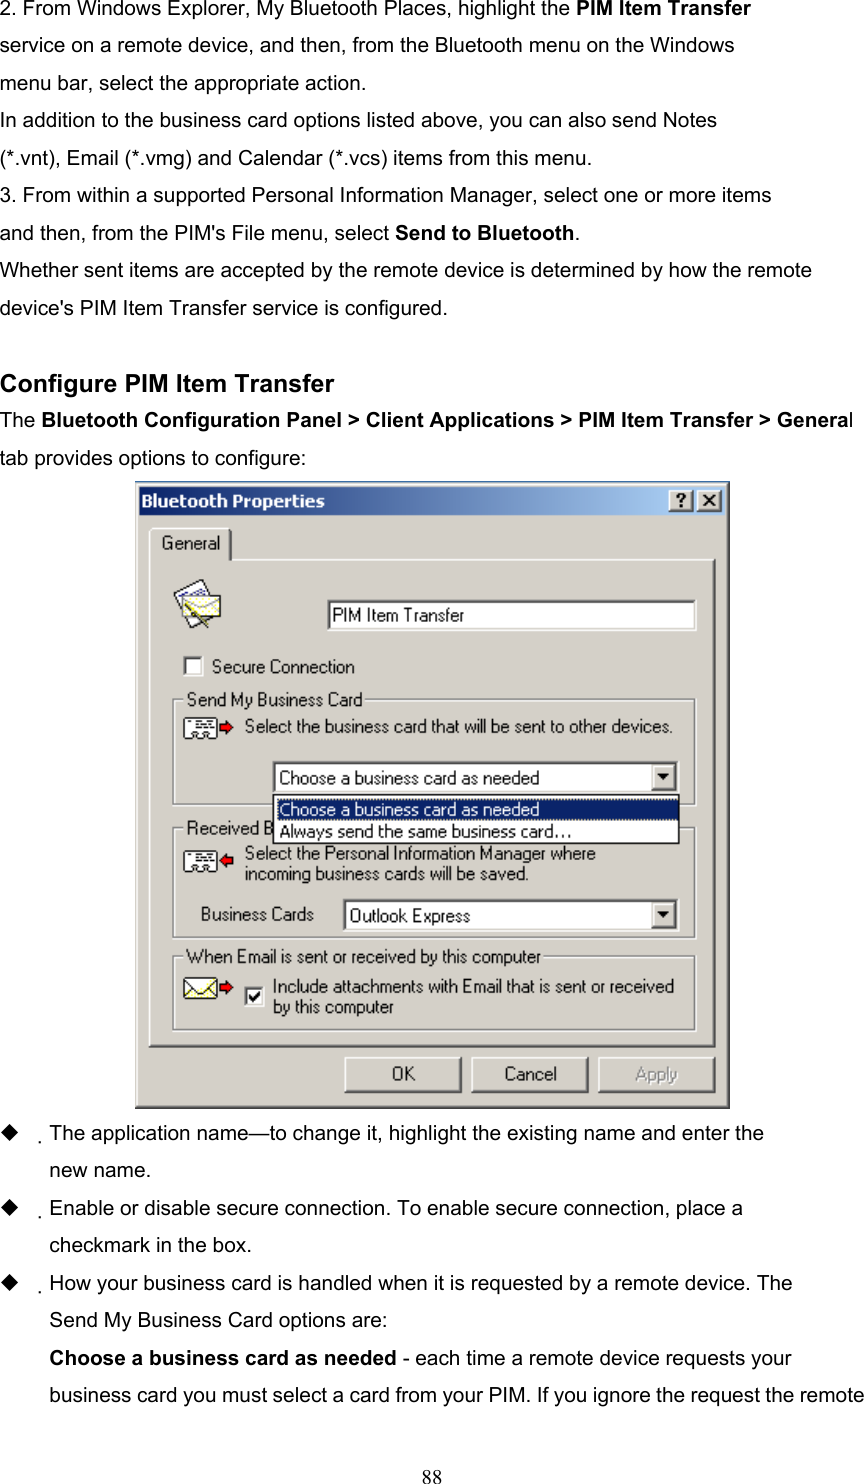 2. From Windows Explorer, My Bluetooth Places, highlight the PIM Item Transfer service on a remote device, and then, from the Bluetooth menu on the Windows menu bar, select the appropriate action. In addition to the business card options listed above, you can also send Notes (*.vnt), Email (*.vmg) and Calendar (*.vcs) items from this menu. 3. From within a supported Personal Information Manager, select one or more items and then, from the PIM&apos;s File menu, select Send to Bluetooth. Whether sent items are accepted by the remote device is determined by how the remote device&apos;s PIM Item Transfer service is configured.  Configure PIM Item Transfer The Bluetooth Configuration Panel &gt; Client Applications &gt; PIM Item Transfer &gt; General tab provides options to configure:    The application name—to change it, highlight the existing name and enter the new name.   Enable or disable secure connection. To enable secure connection, place a checkmark in the box.   How your business card is handled when it is requested by a remote device. The Send My Business Card options are: Choose a business card as needed - each time a remote device requests your business card you must select a card from your PIM. If you ignore the request the remote  88 